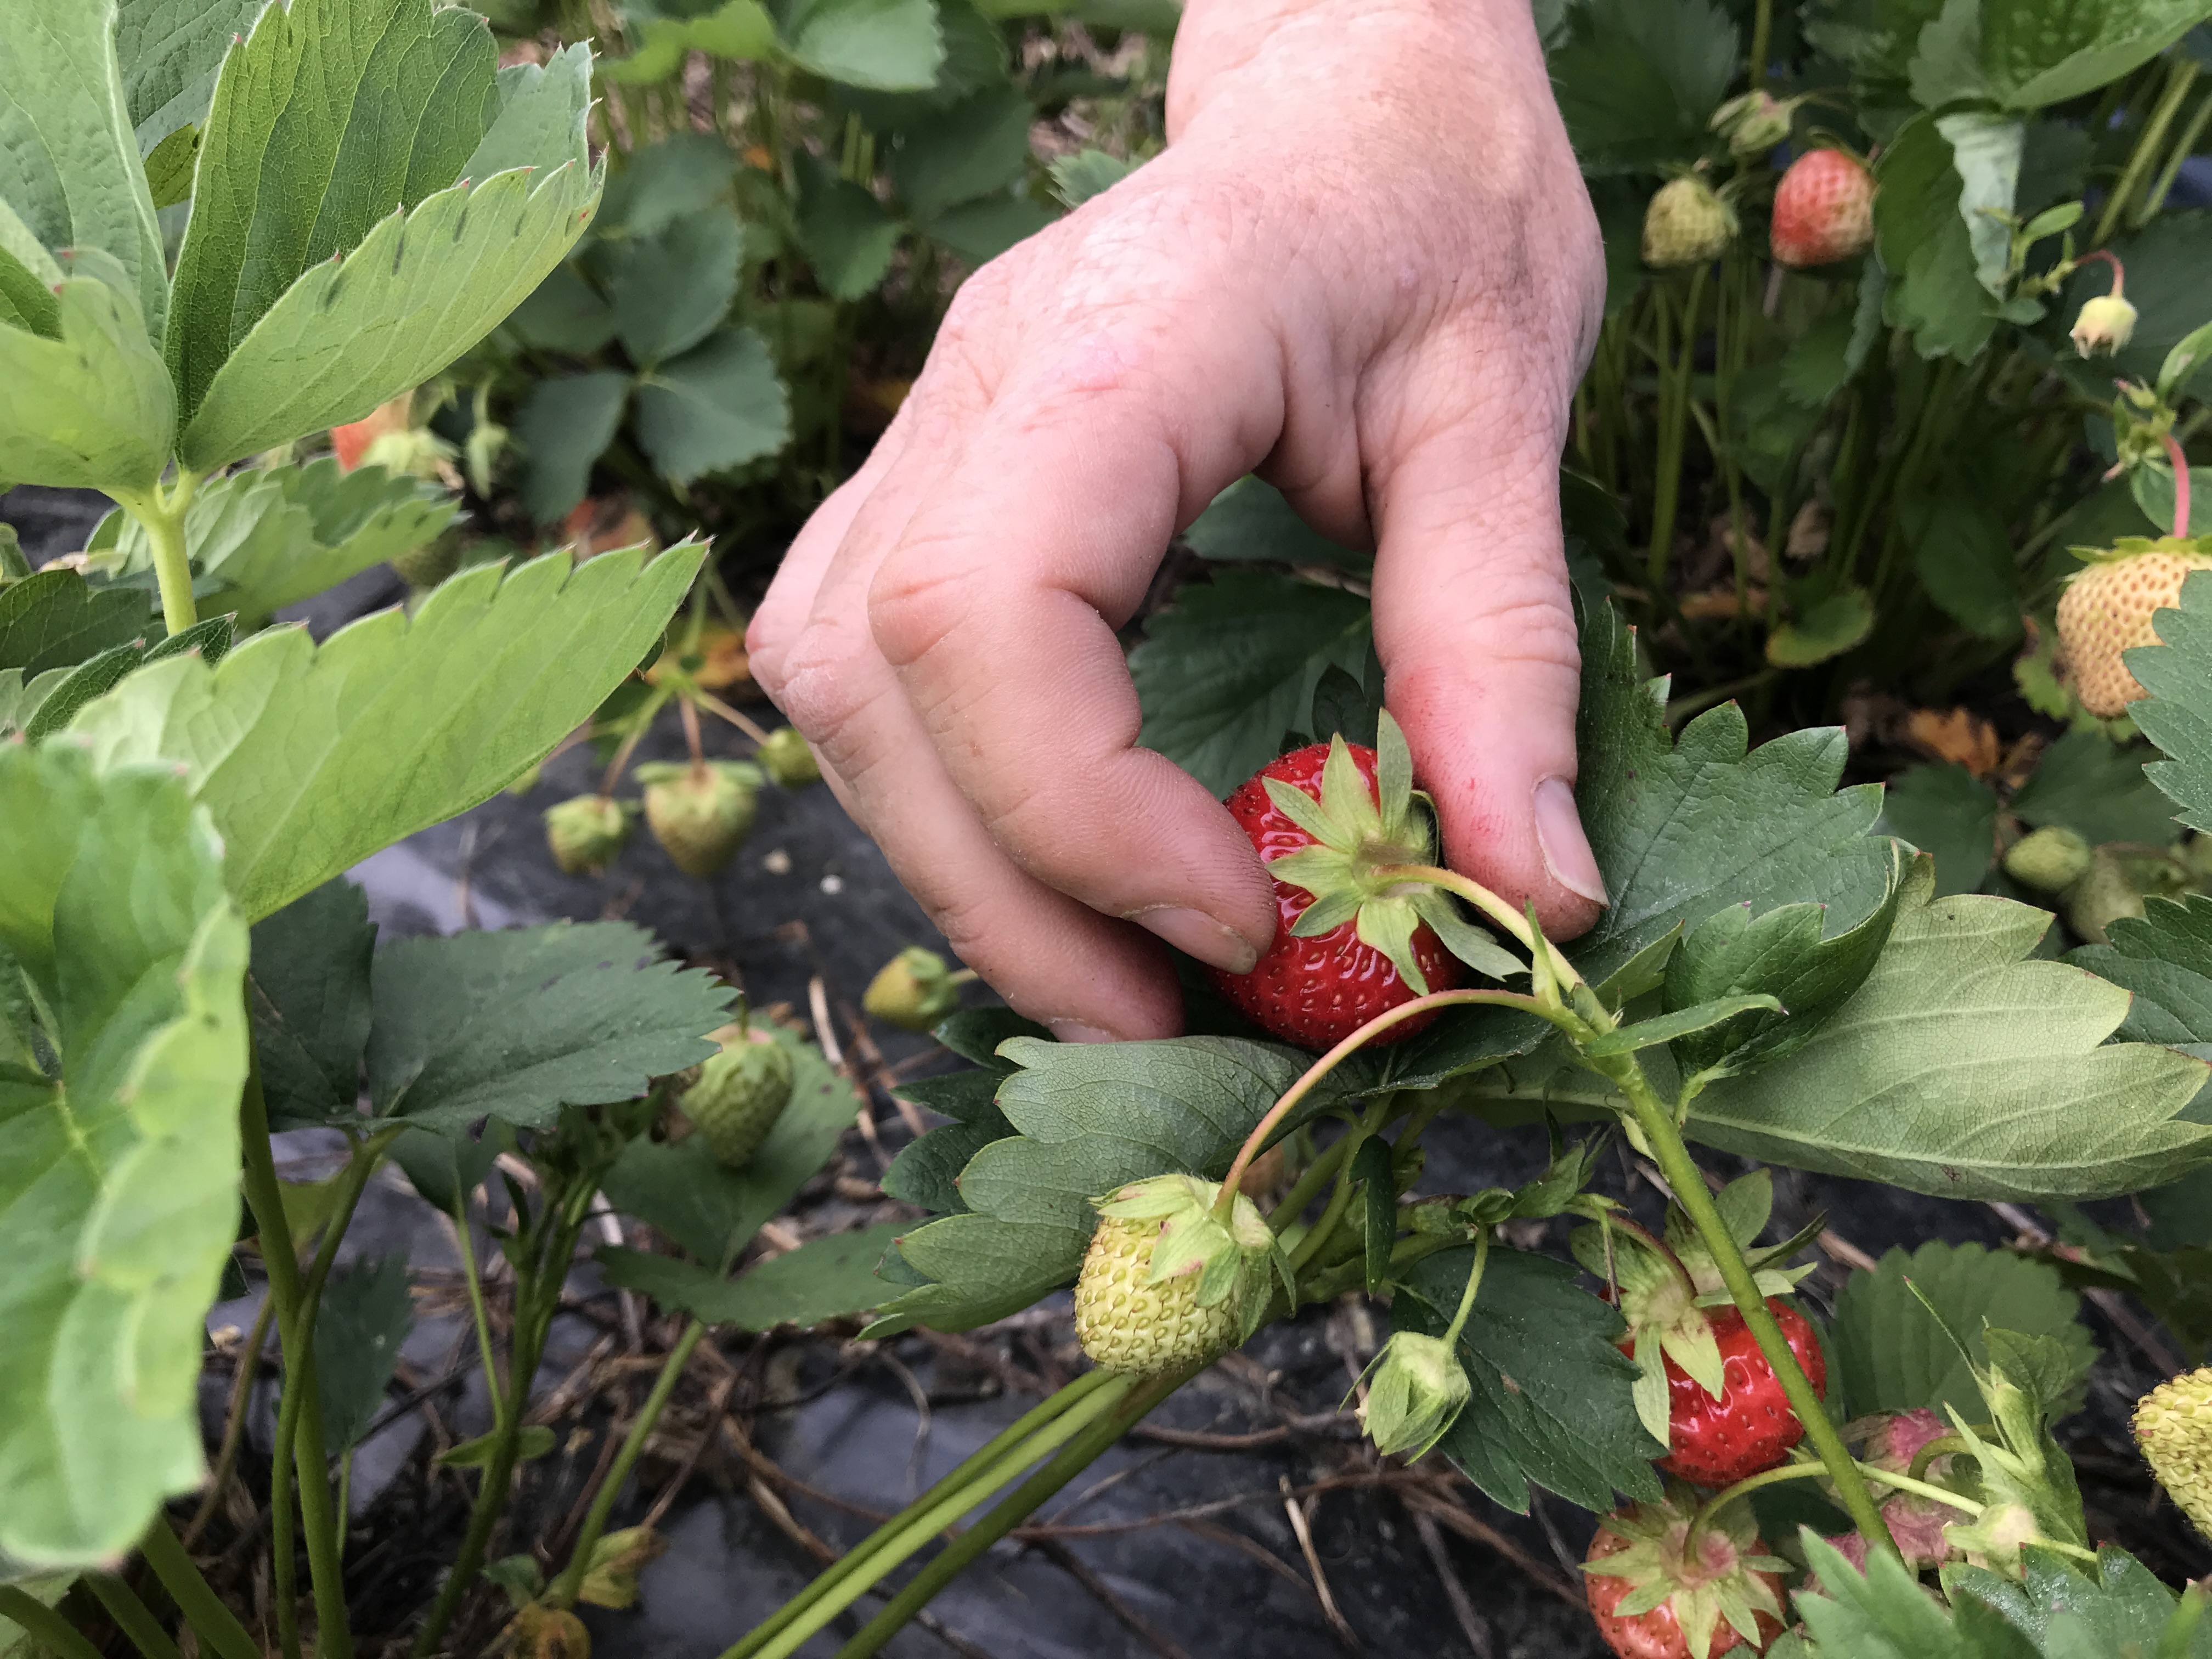 Police will not take action because of the zero-hour contract for berry pickers